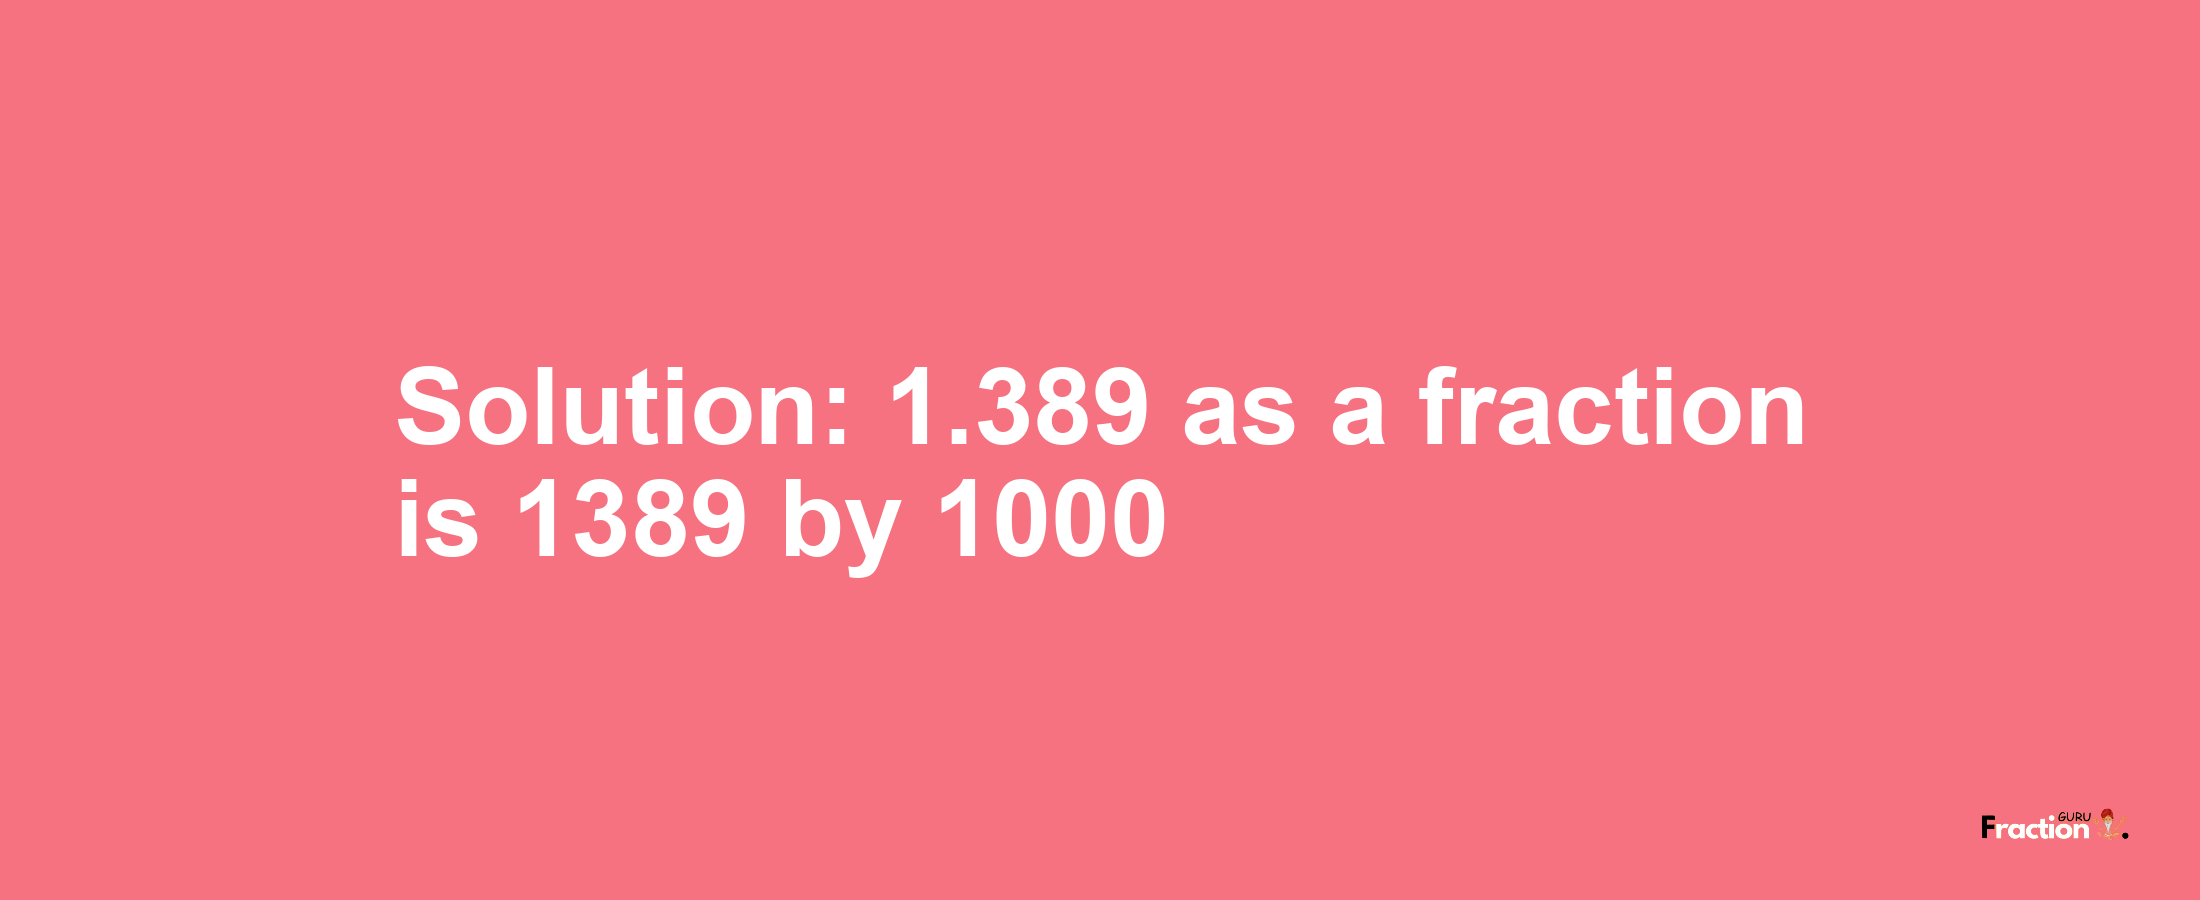 Solution:1.389 as a fraction is 1389/1000